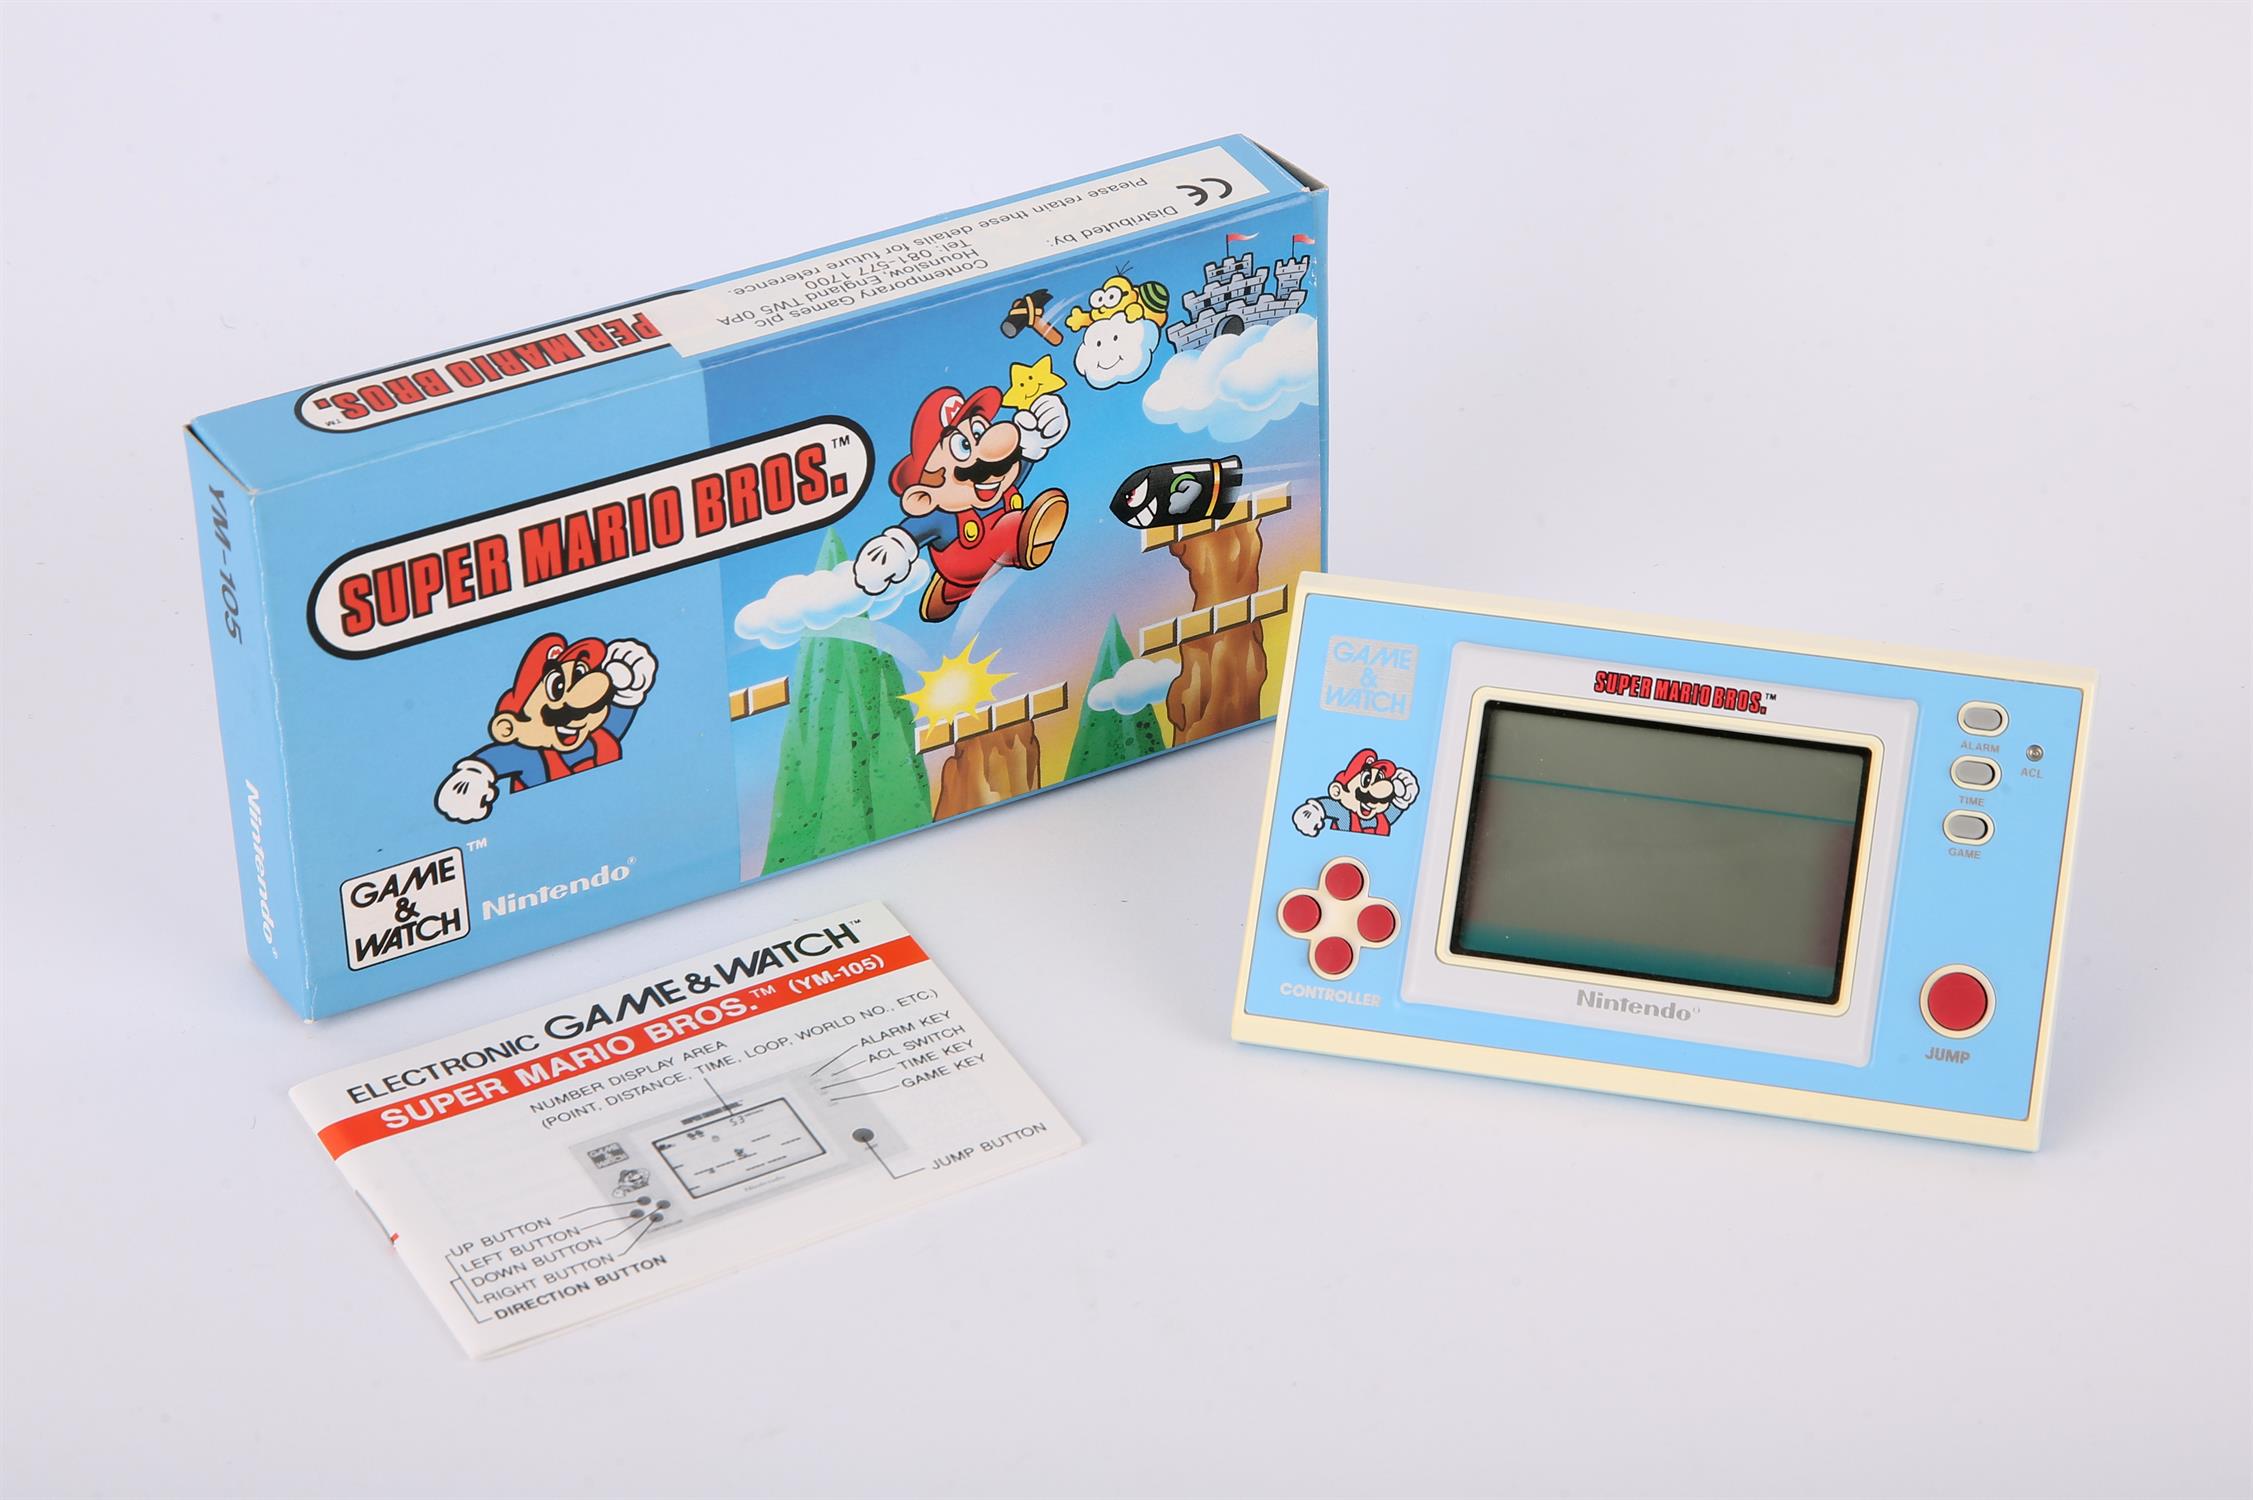 Nintendo Game & Watch Super Mario Bros. [YM-105] handheld console from 1988 (complete and boxed)